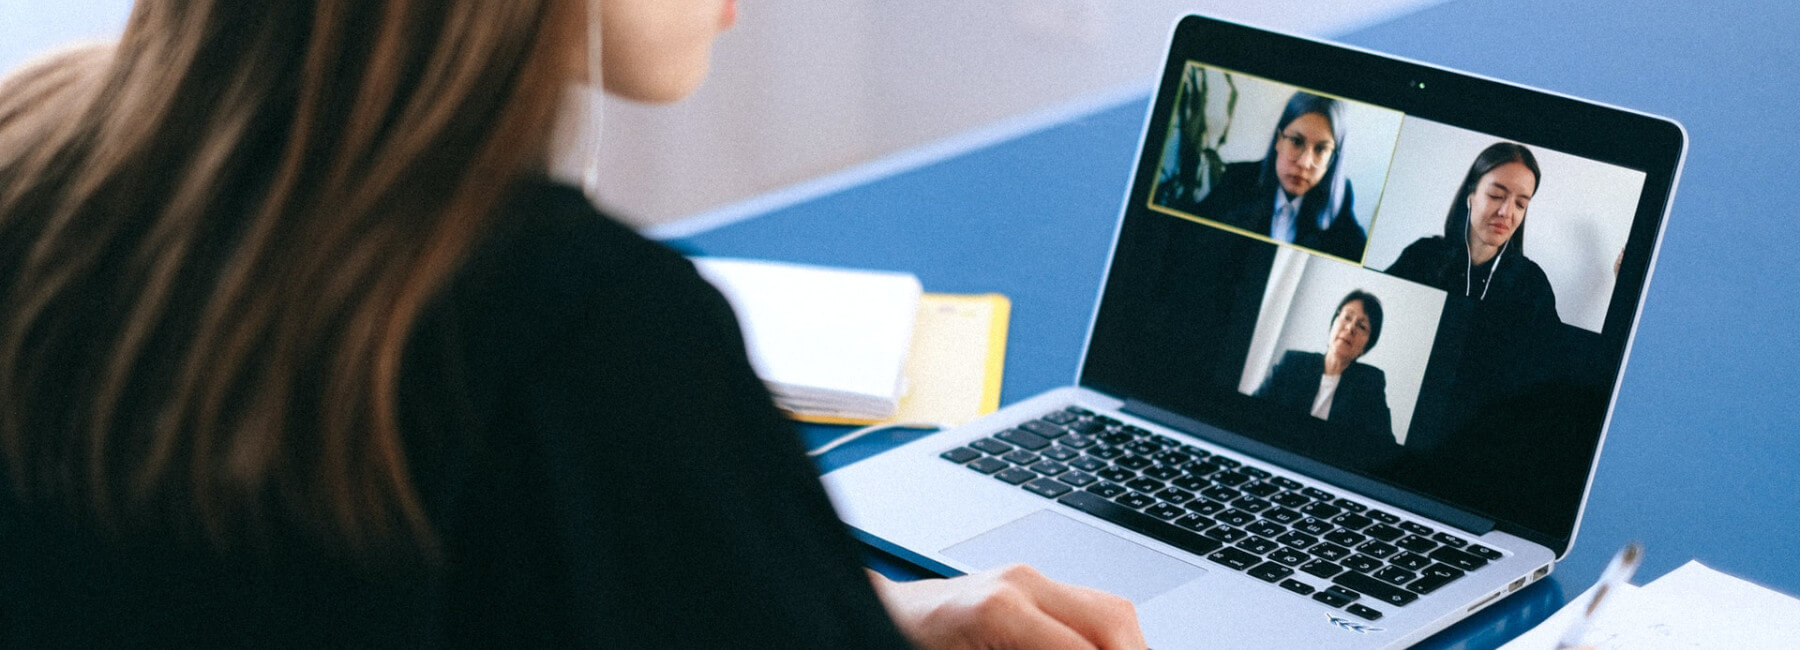 Top 25 Best Video Conferencing Software for Remote Workers